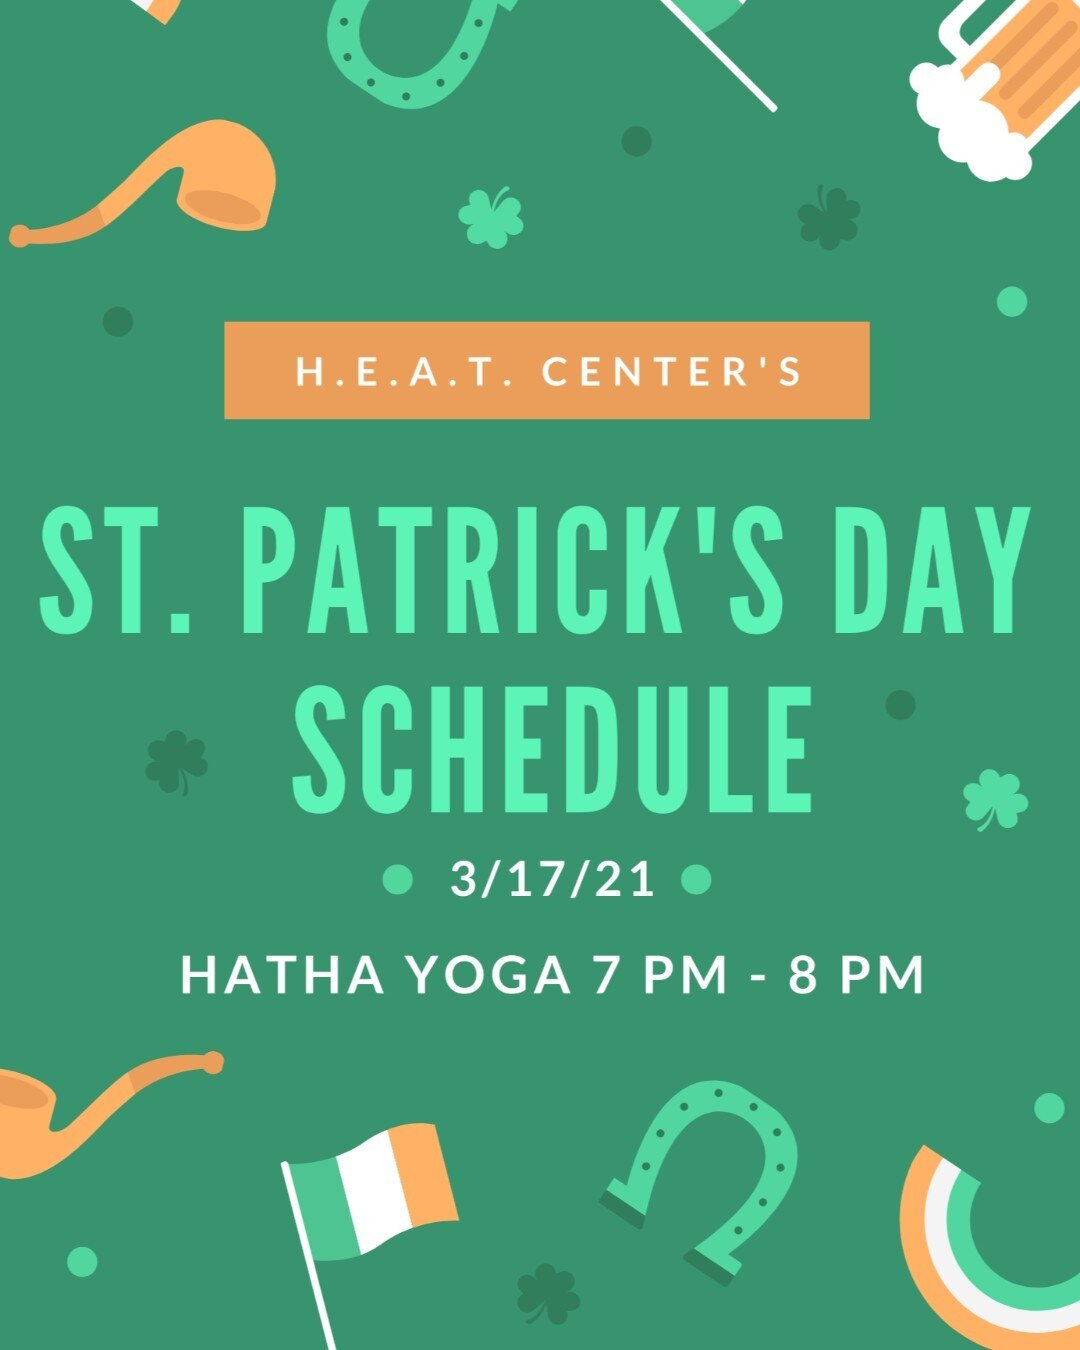 HAPPY ST. PATRICK'S DAY!☘️ Celebrate with us by joining our Hatha Yoga class tonight from 7PM-8PM. Sign up online at www.heateducation.org!
#health #education #teamwork #community #iamgnv #remotehealth #joy #yogaworkout #healthylifestyle